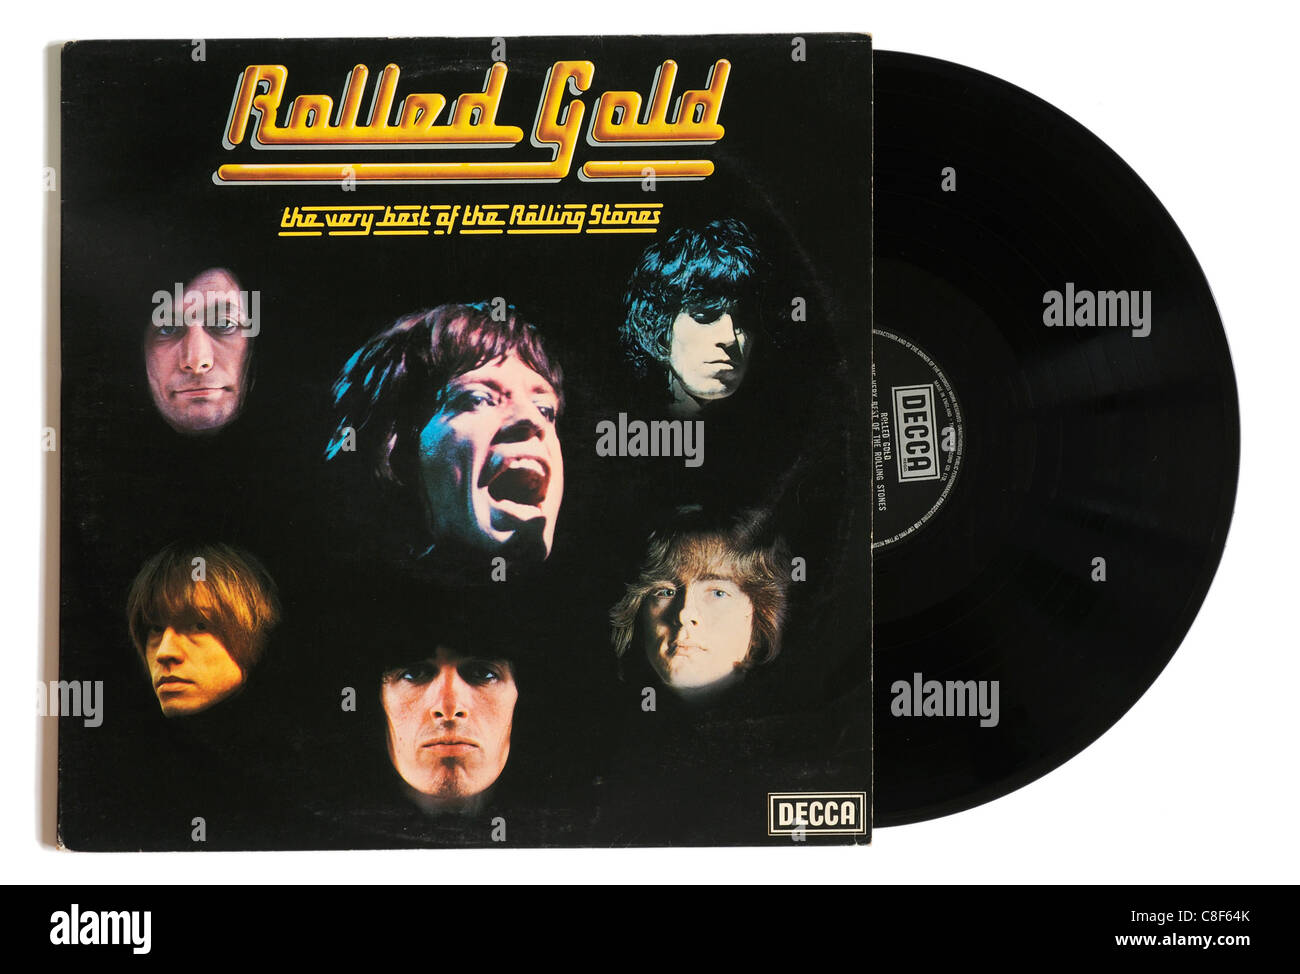 rolled gold plus very best of the rolling stones rare